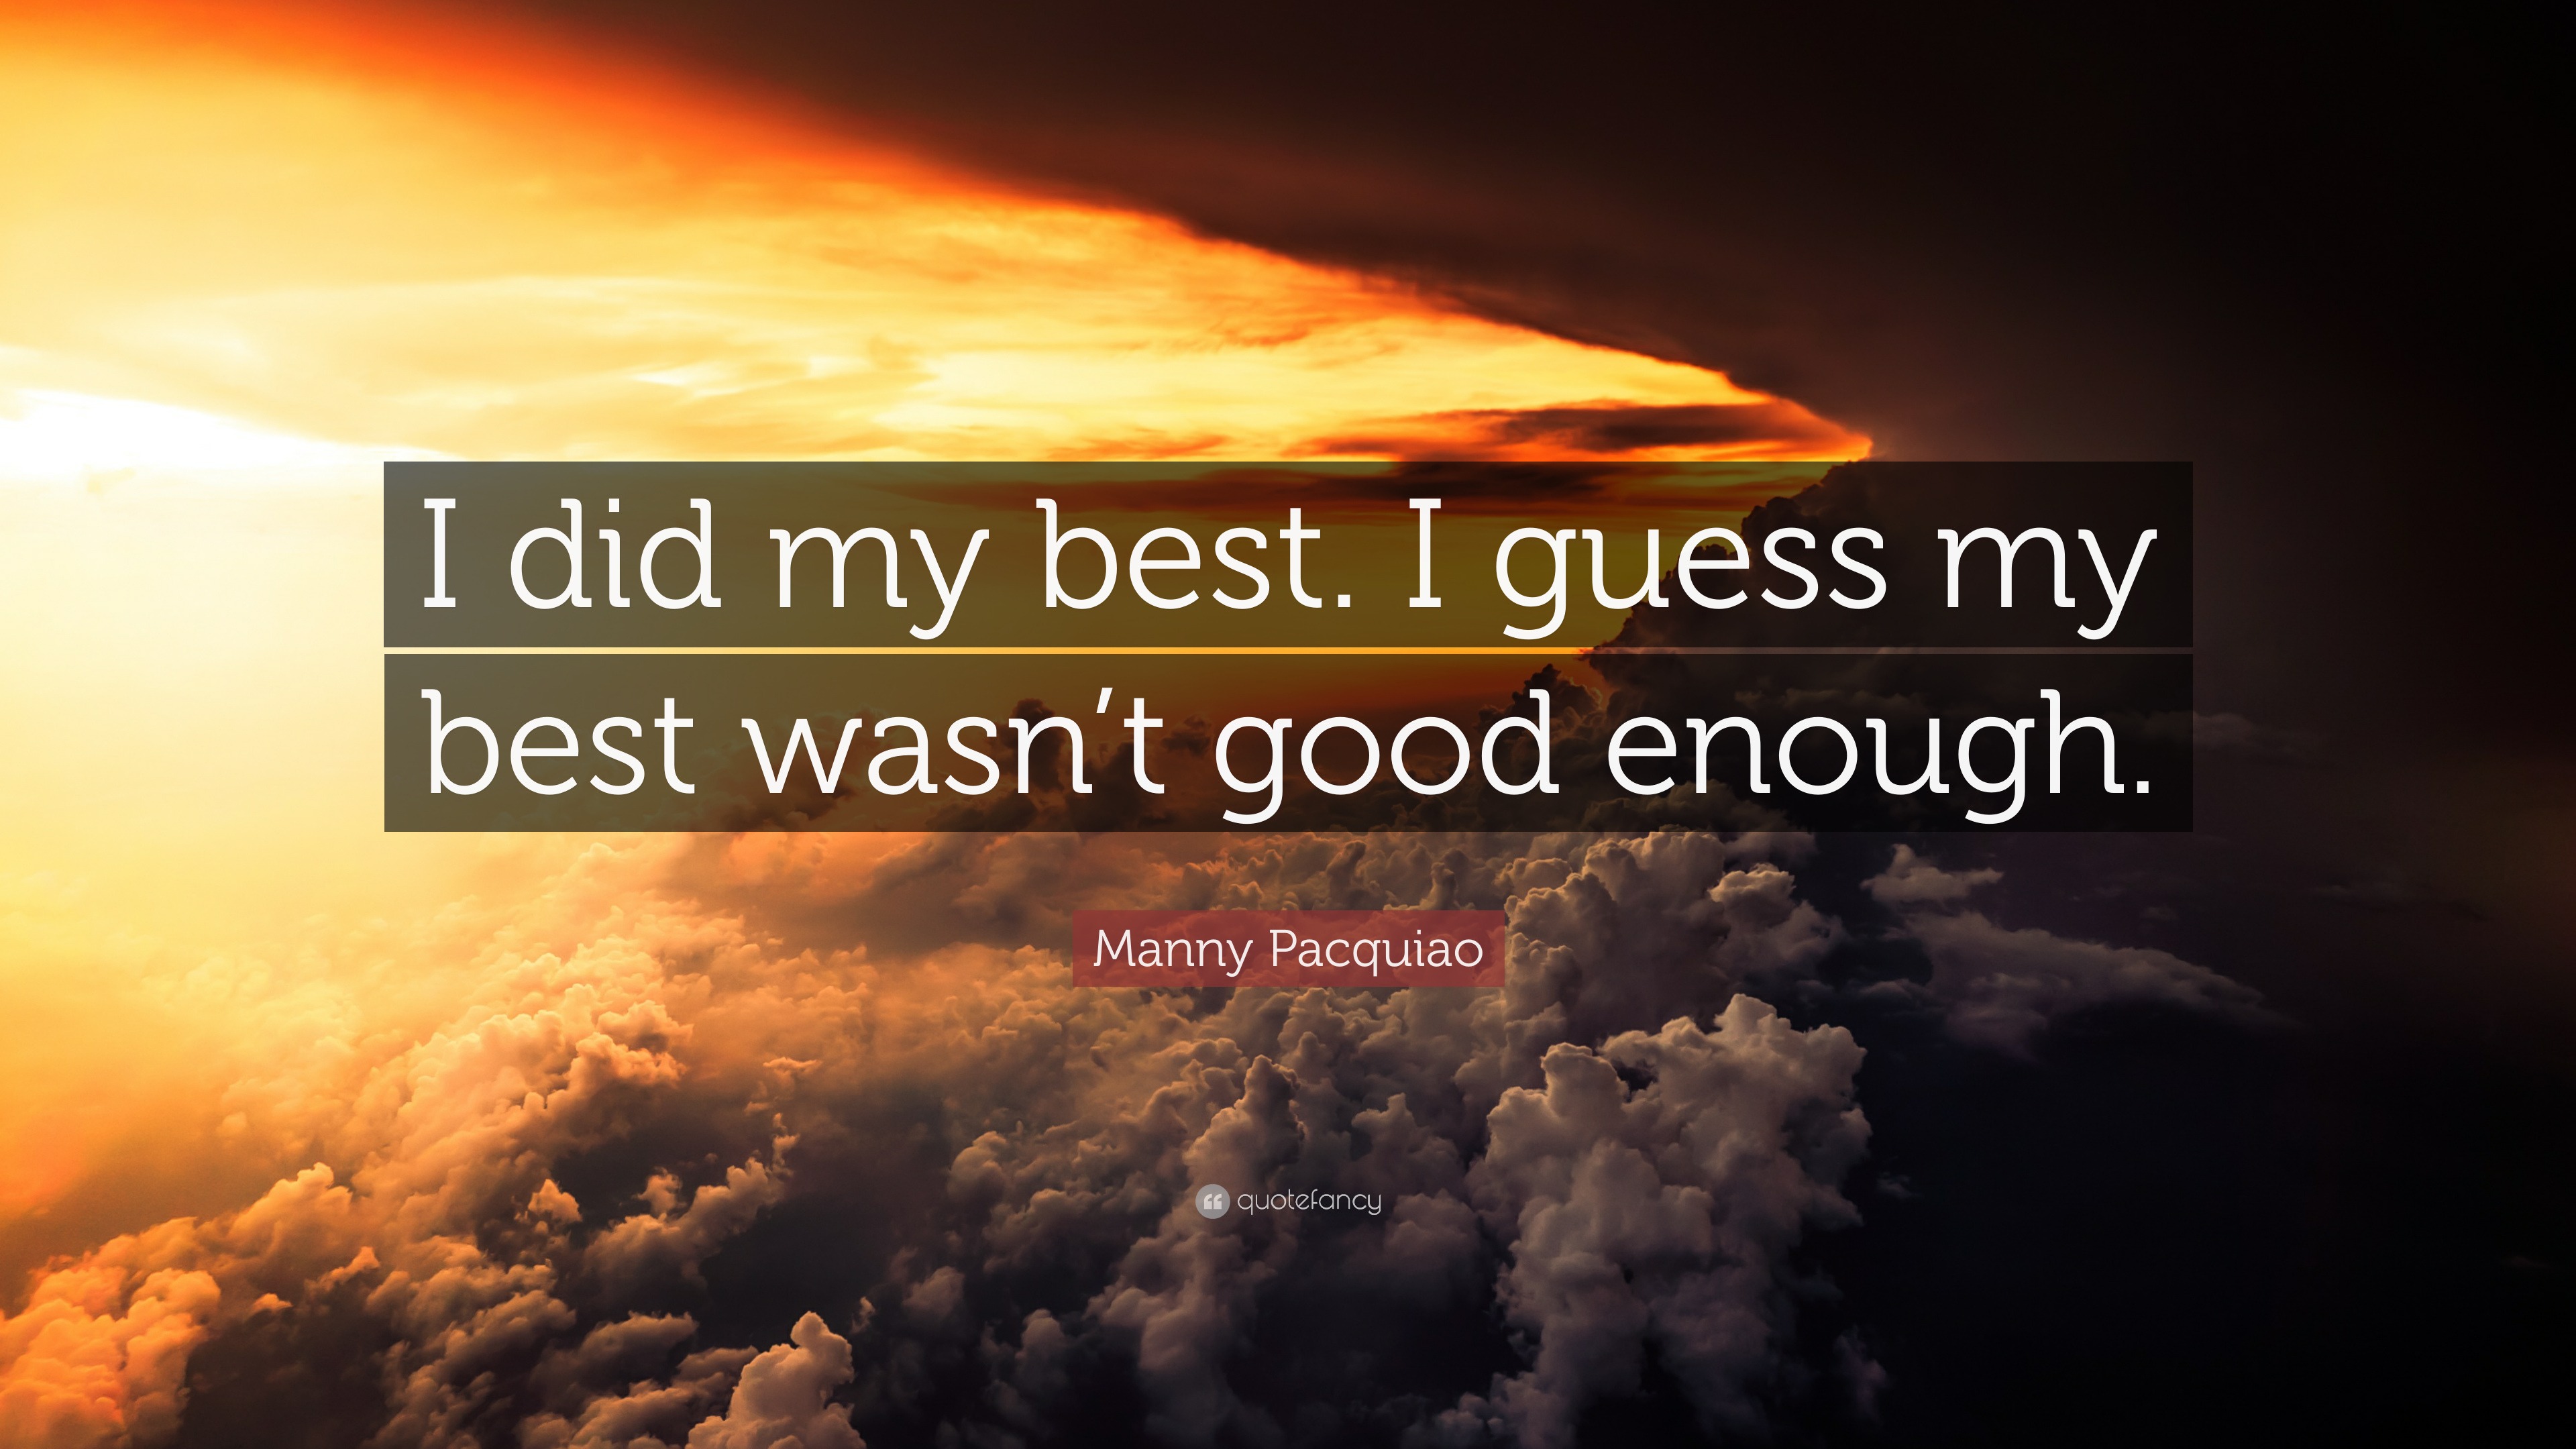 Manny Pacquiao Quote: “I did my best. my best wasn't good enough.”